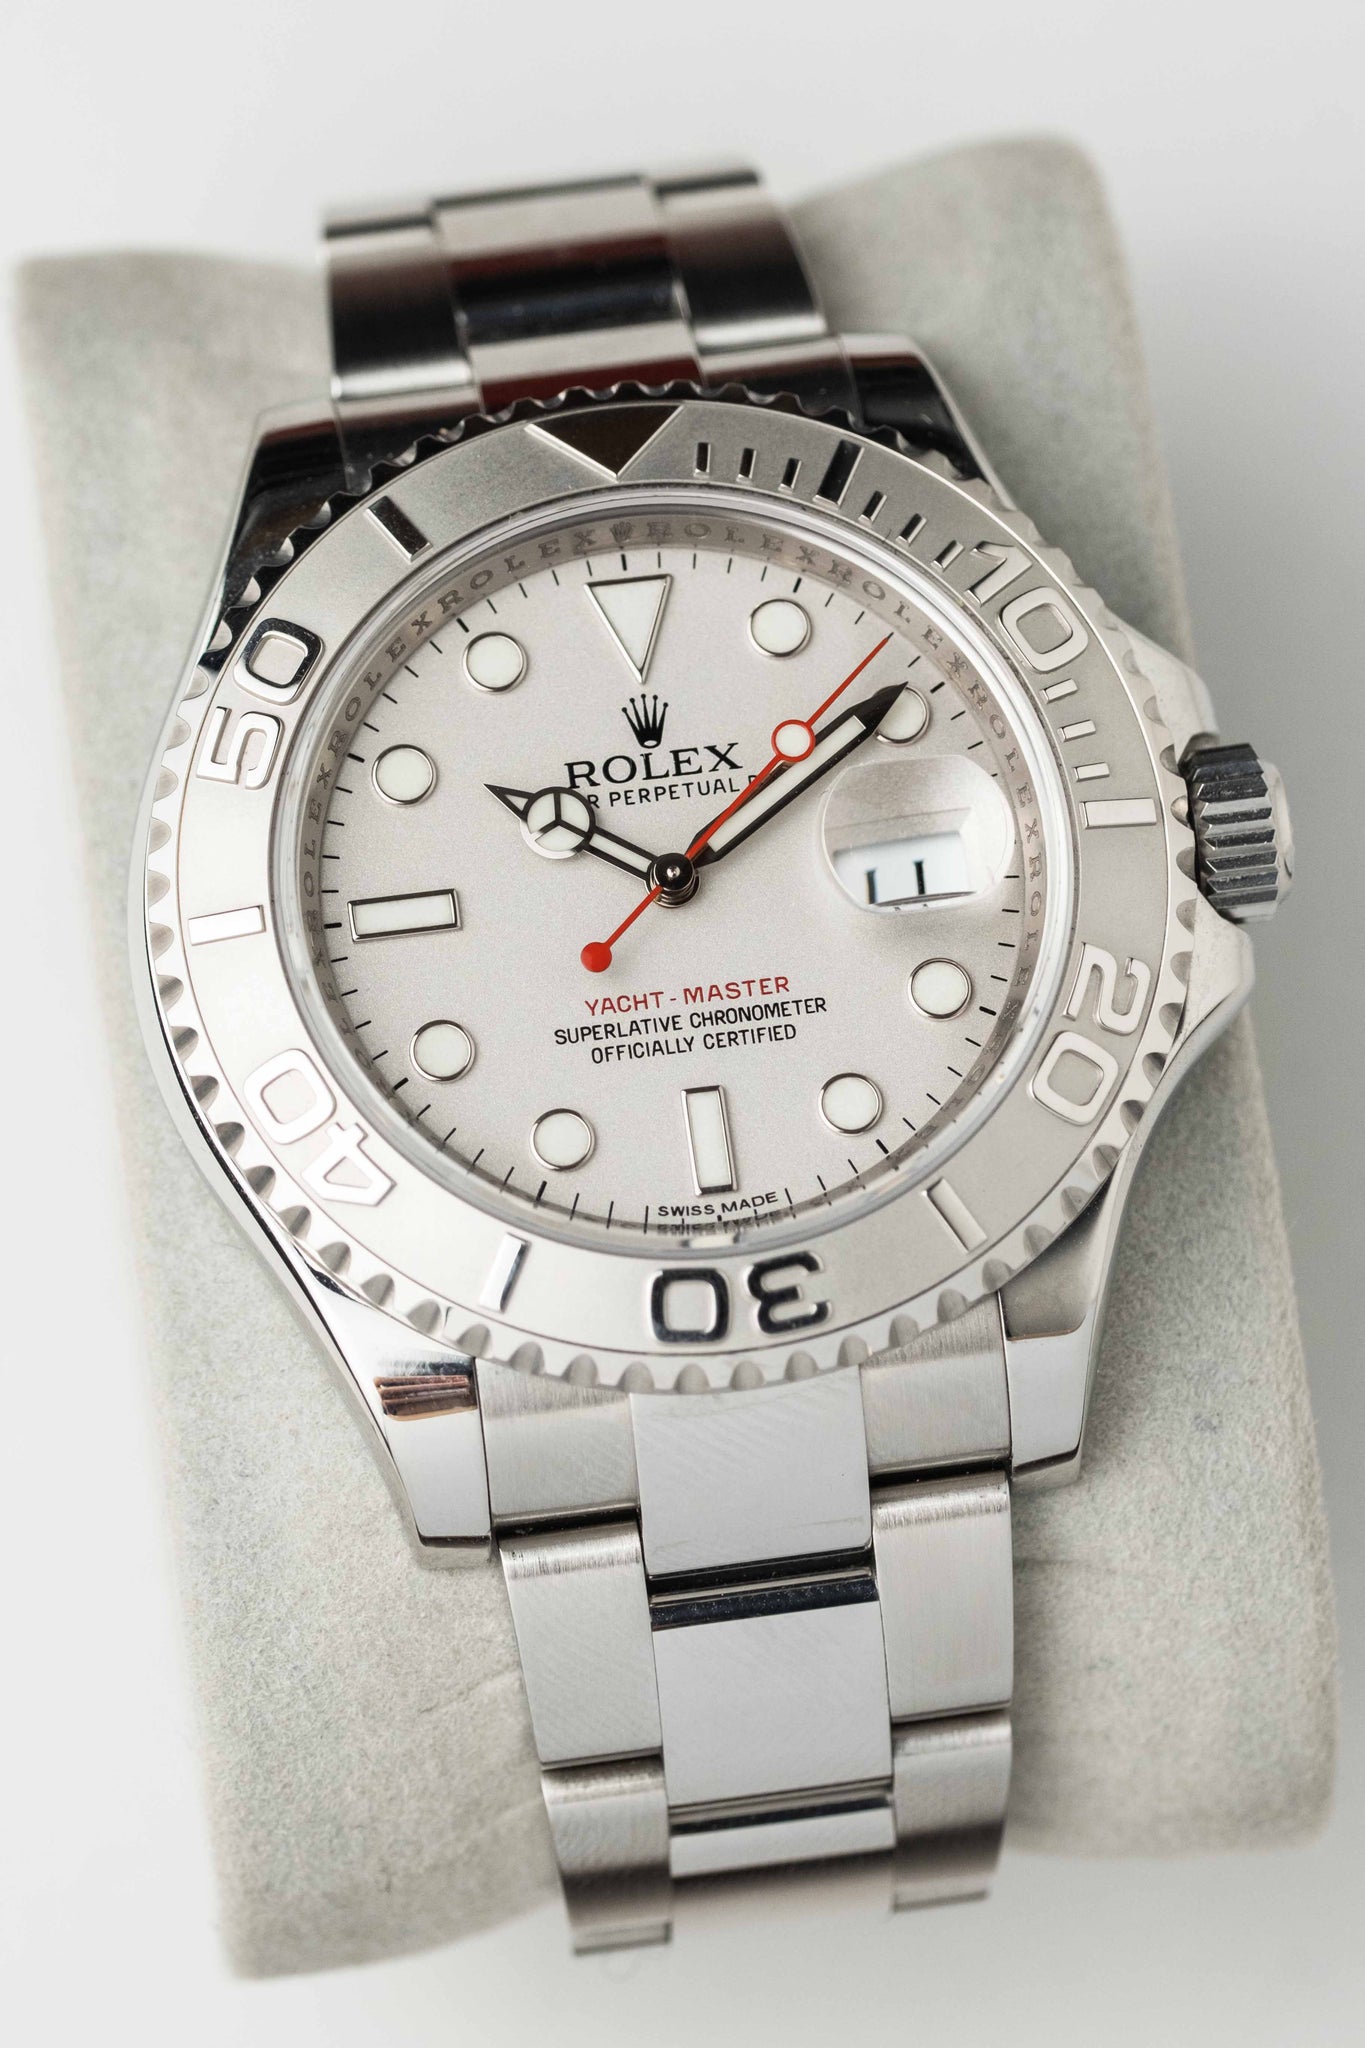 Rolex Yacht-Master 'Platinum' Dial Ref. 116622 2013 w/ Box & Papers Close Up Photo